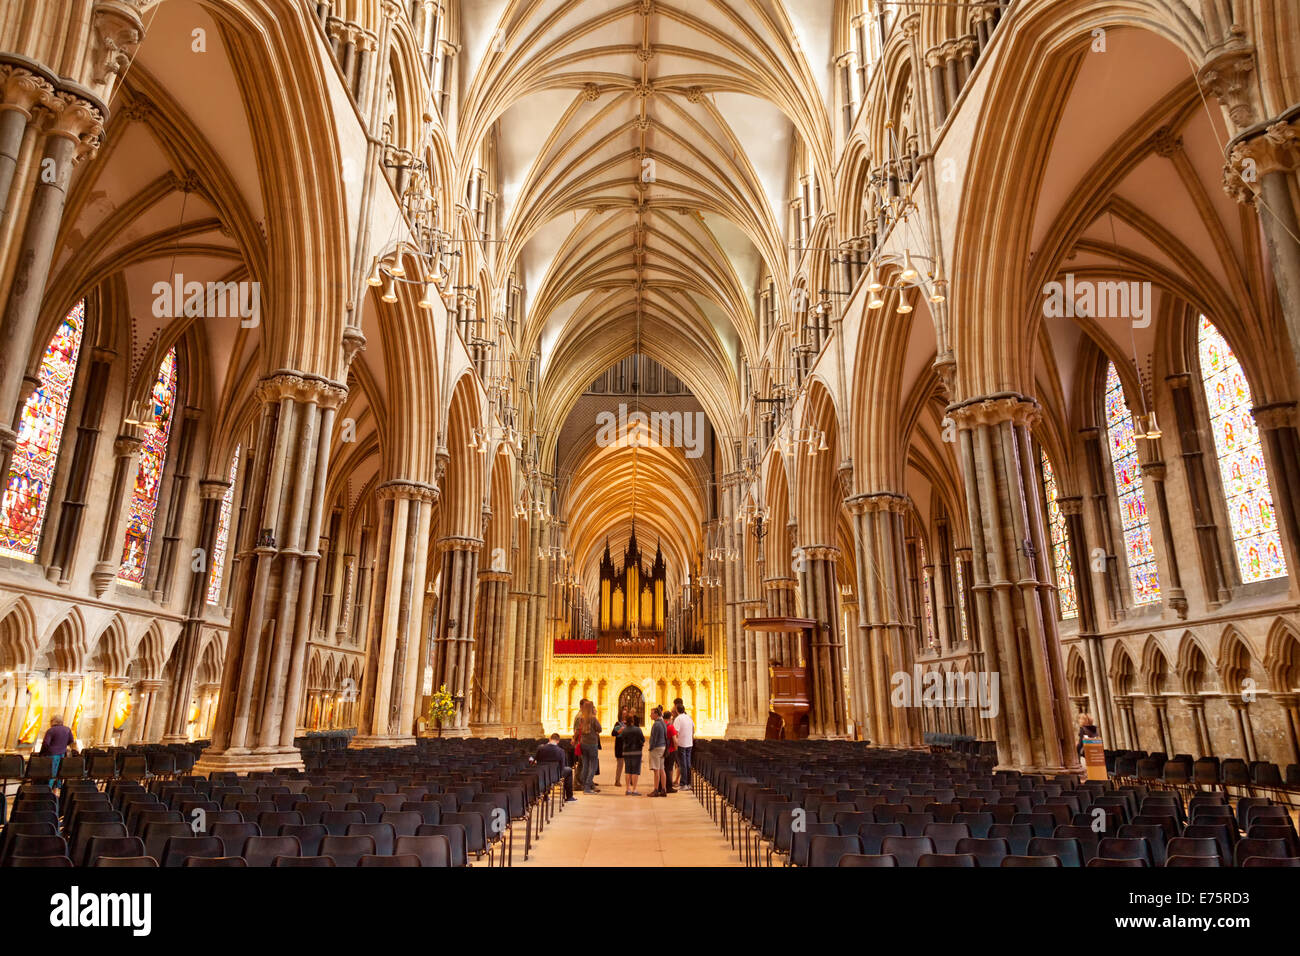 People in the Nave, Lincoln Cathedral or Minster, Lincoln, UK Stock Photo